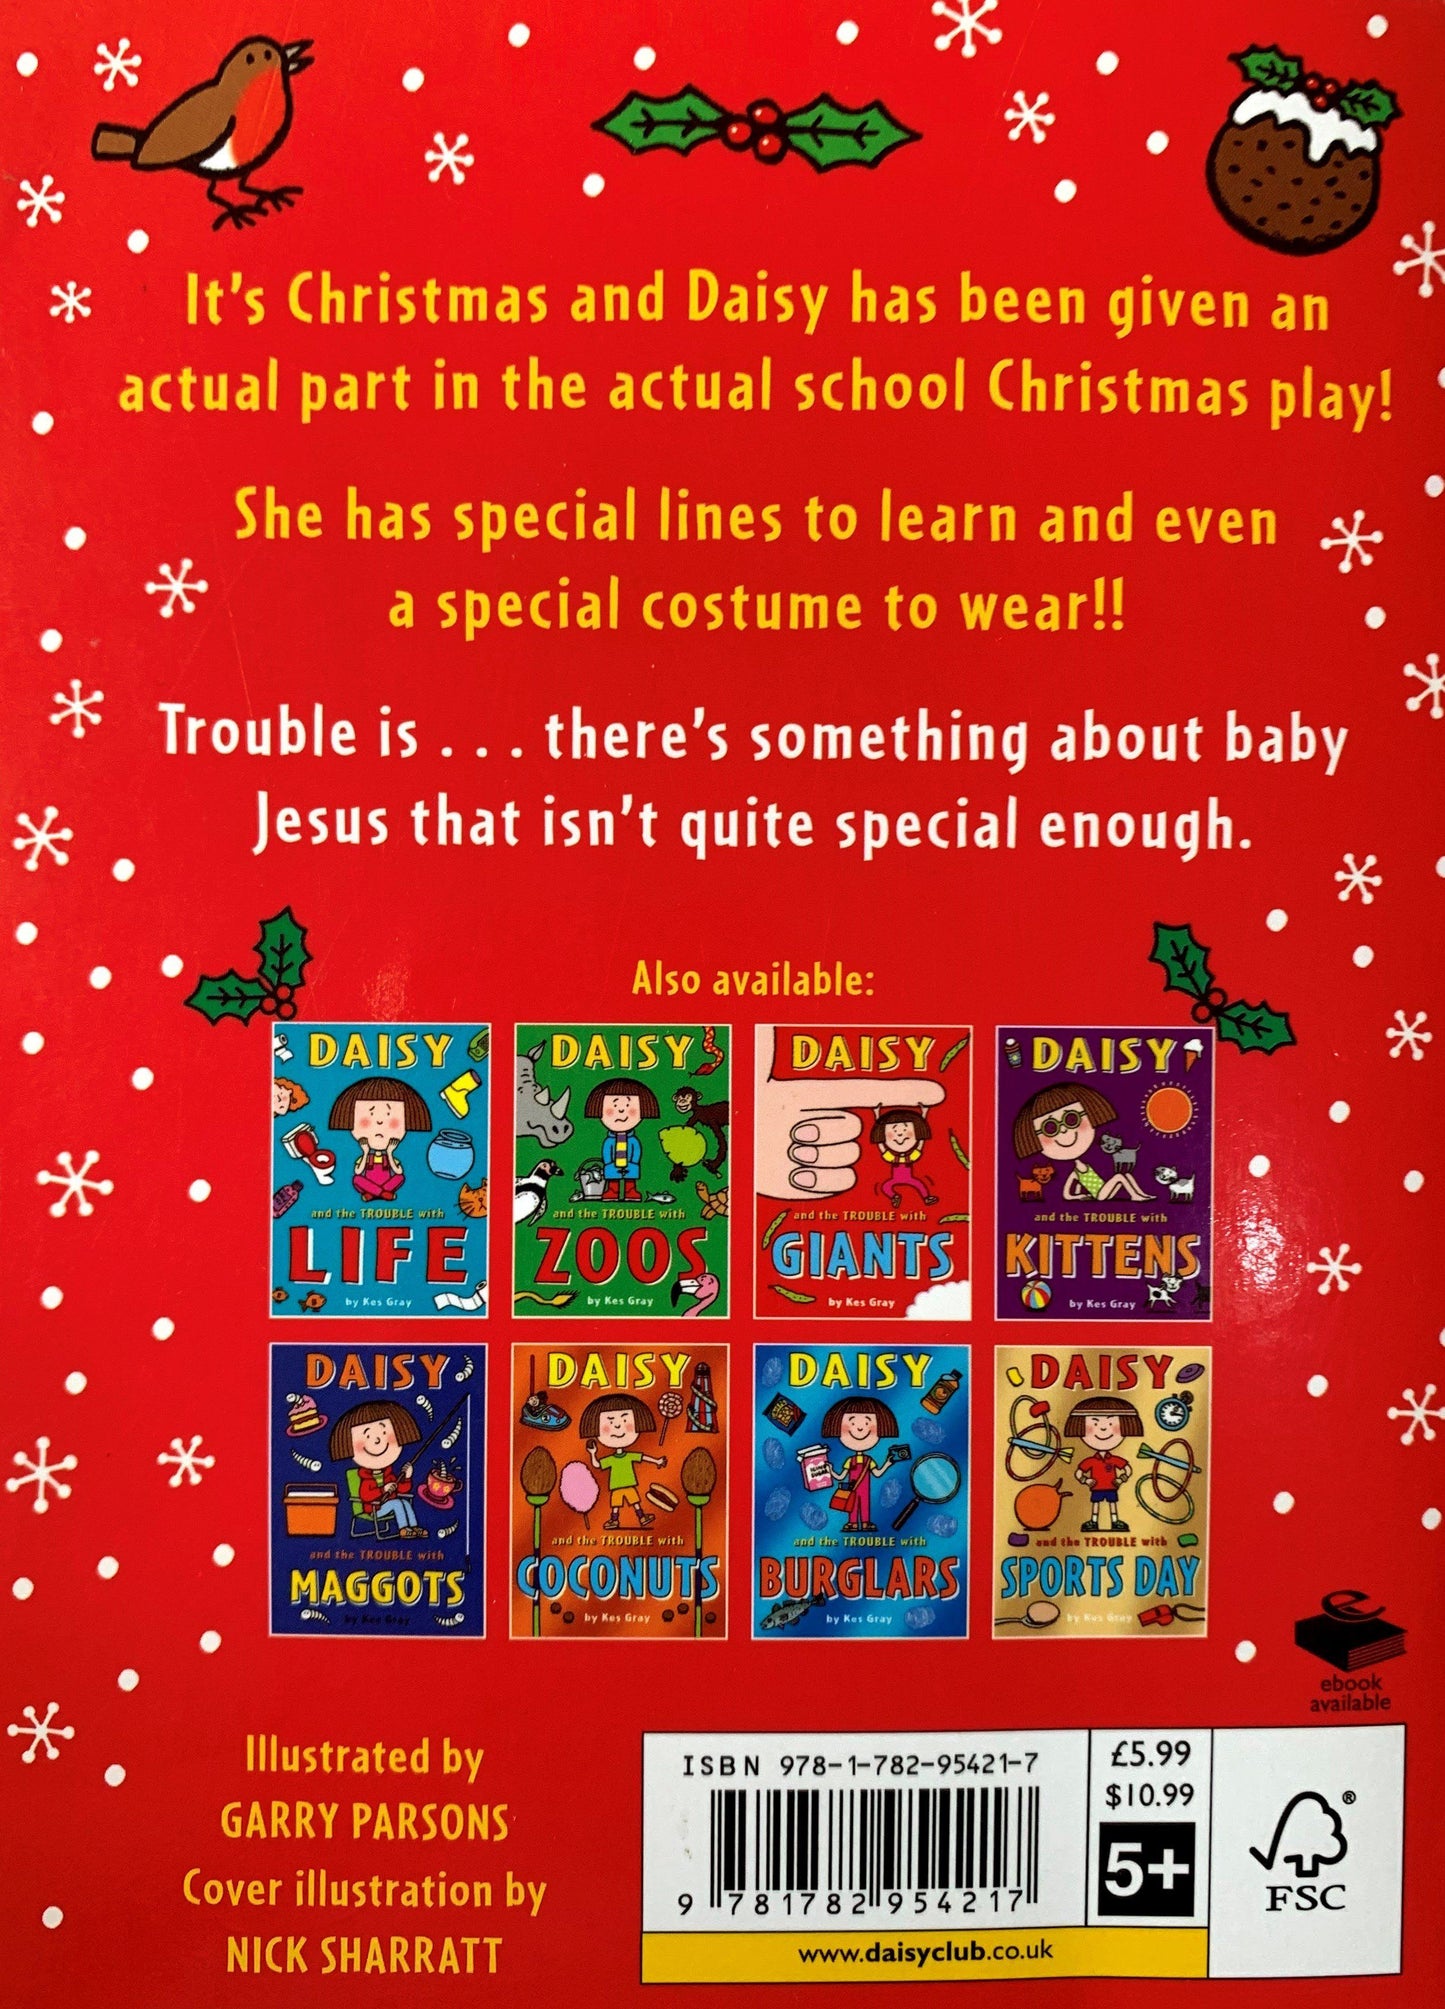 Daisy and the Trouble with Christmas Very Good, 5-9 years Daisy  (7044181065913)